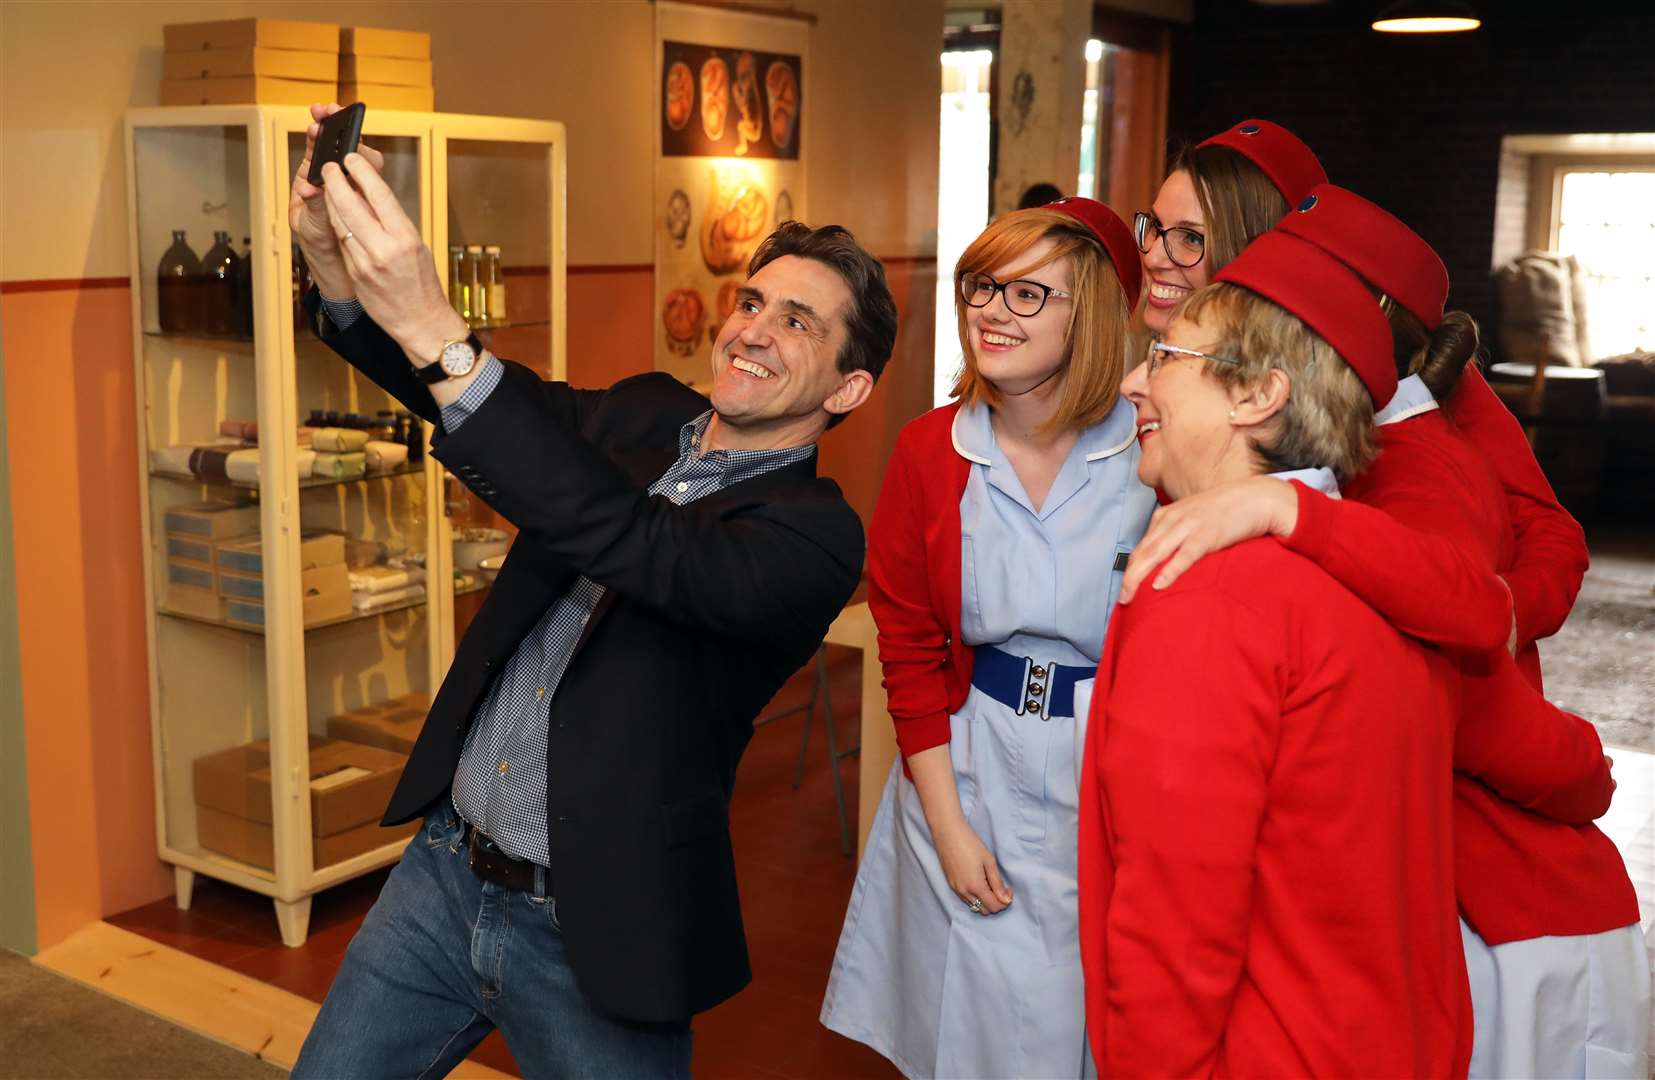 Call the Midwife tours have been popular. Actor Stephen McGann, who plays Dr Turner, with the midwife tour guides